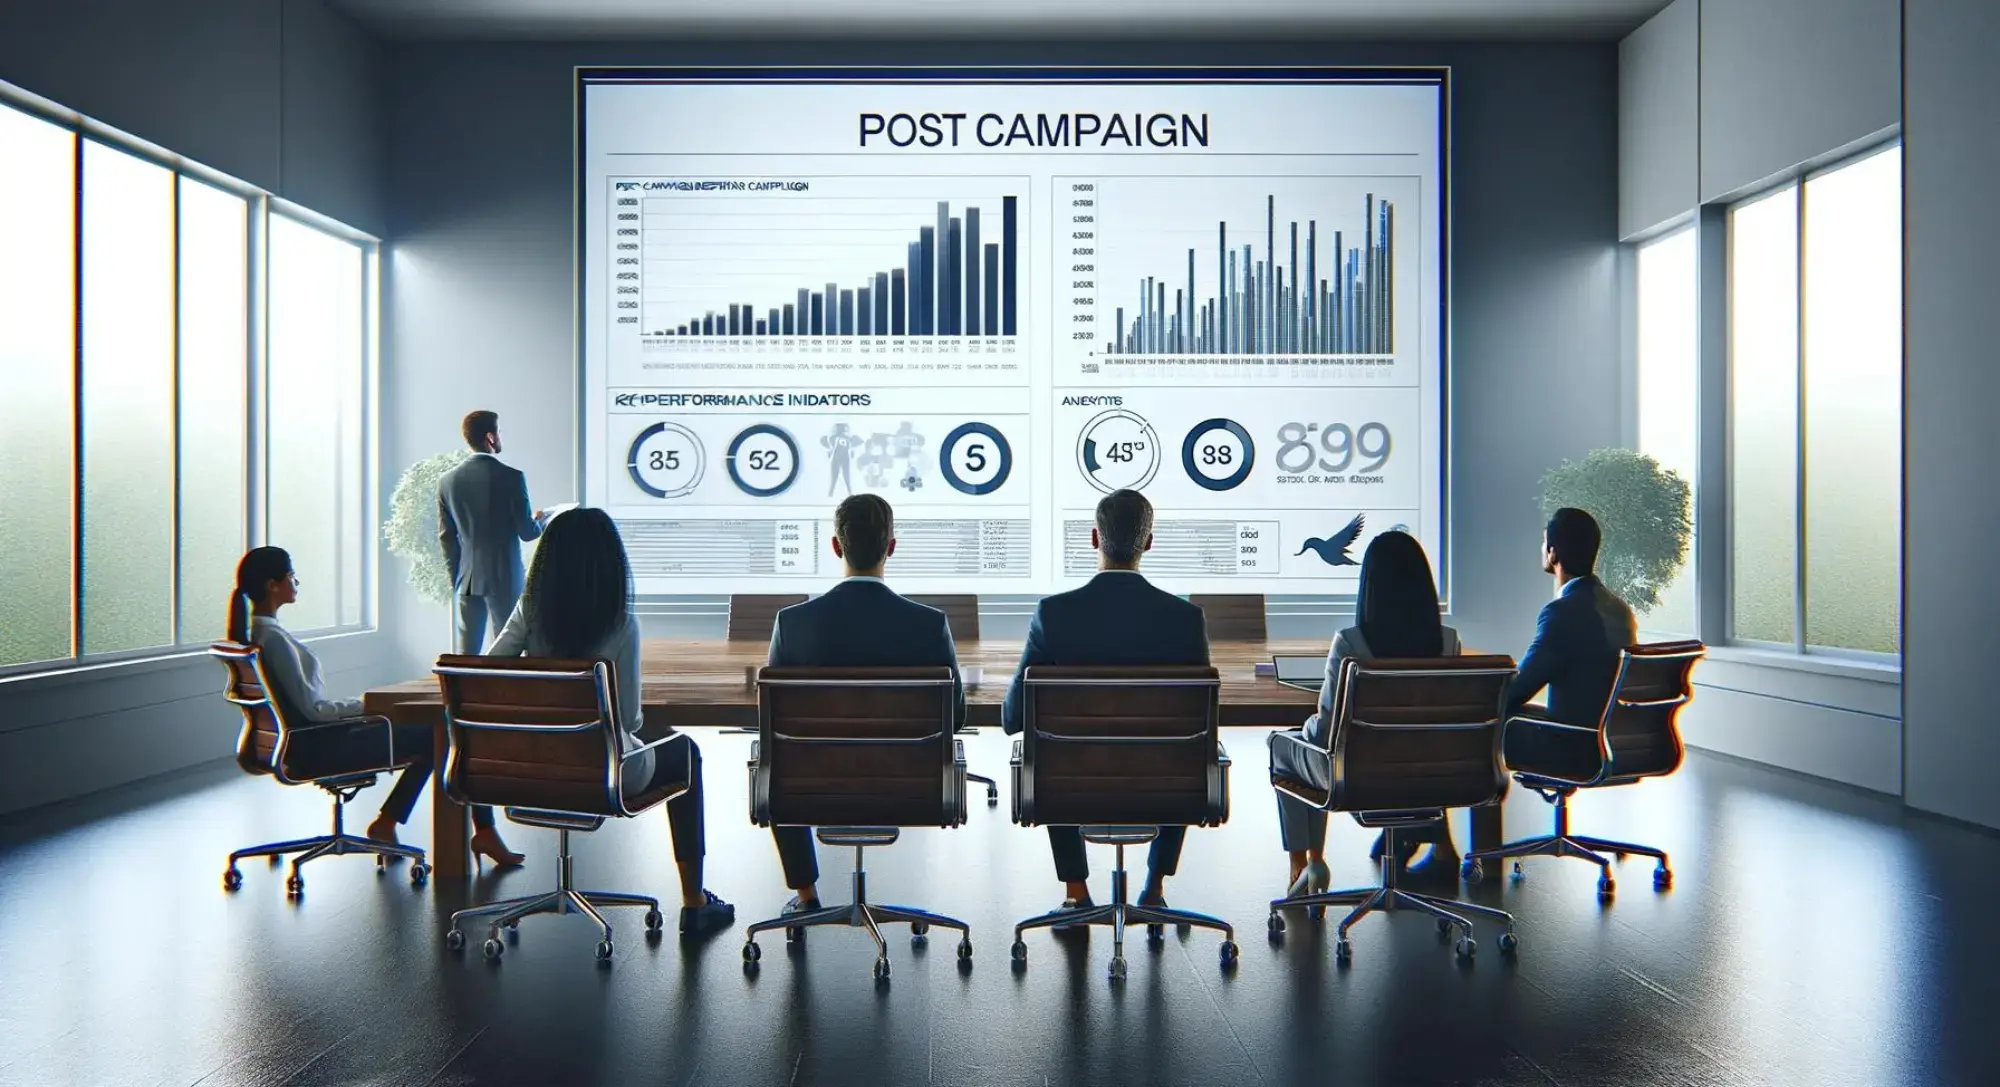 Is Your Post Campaign Analysis Falling Short?